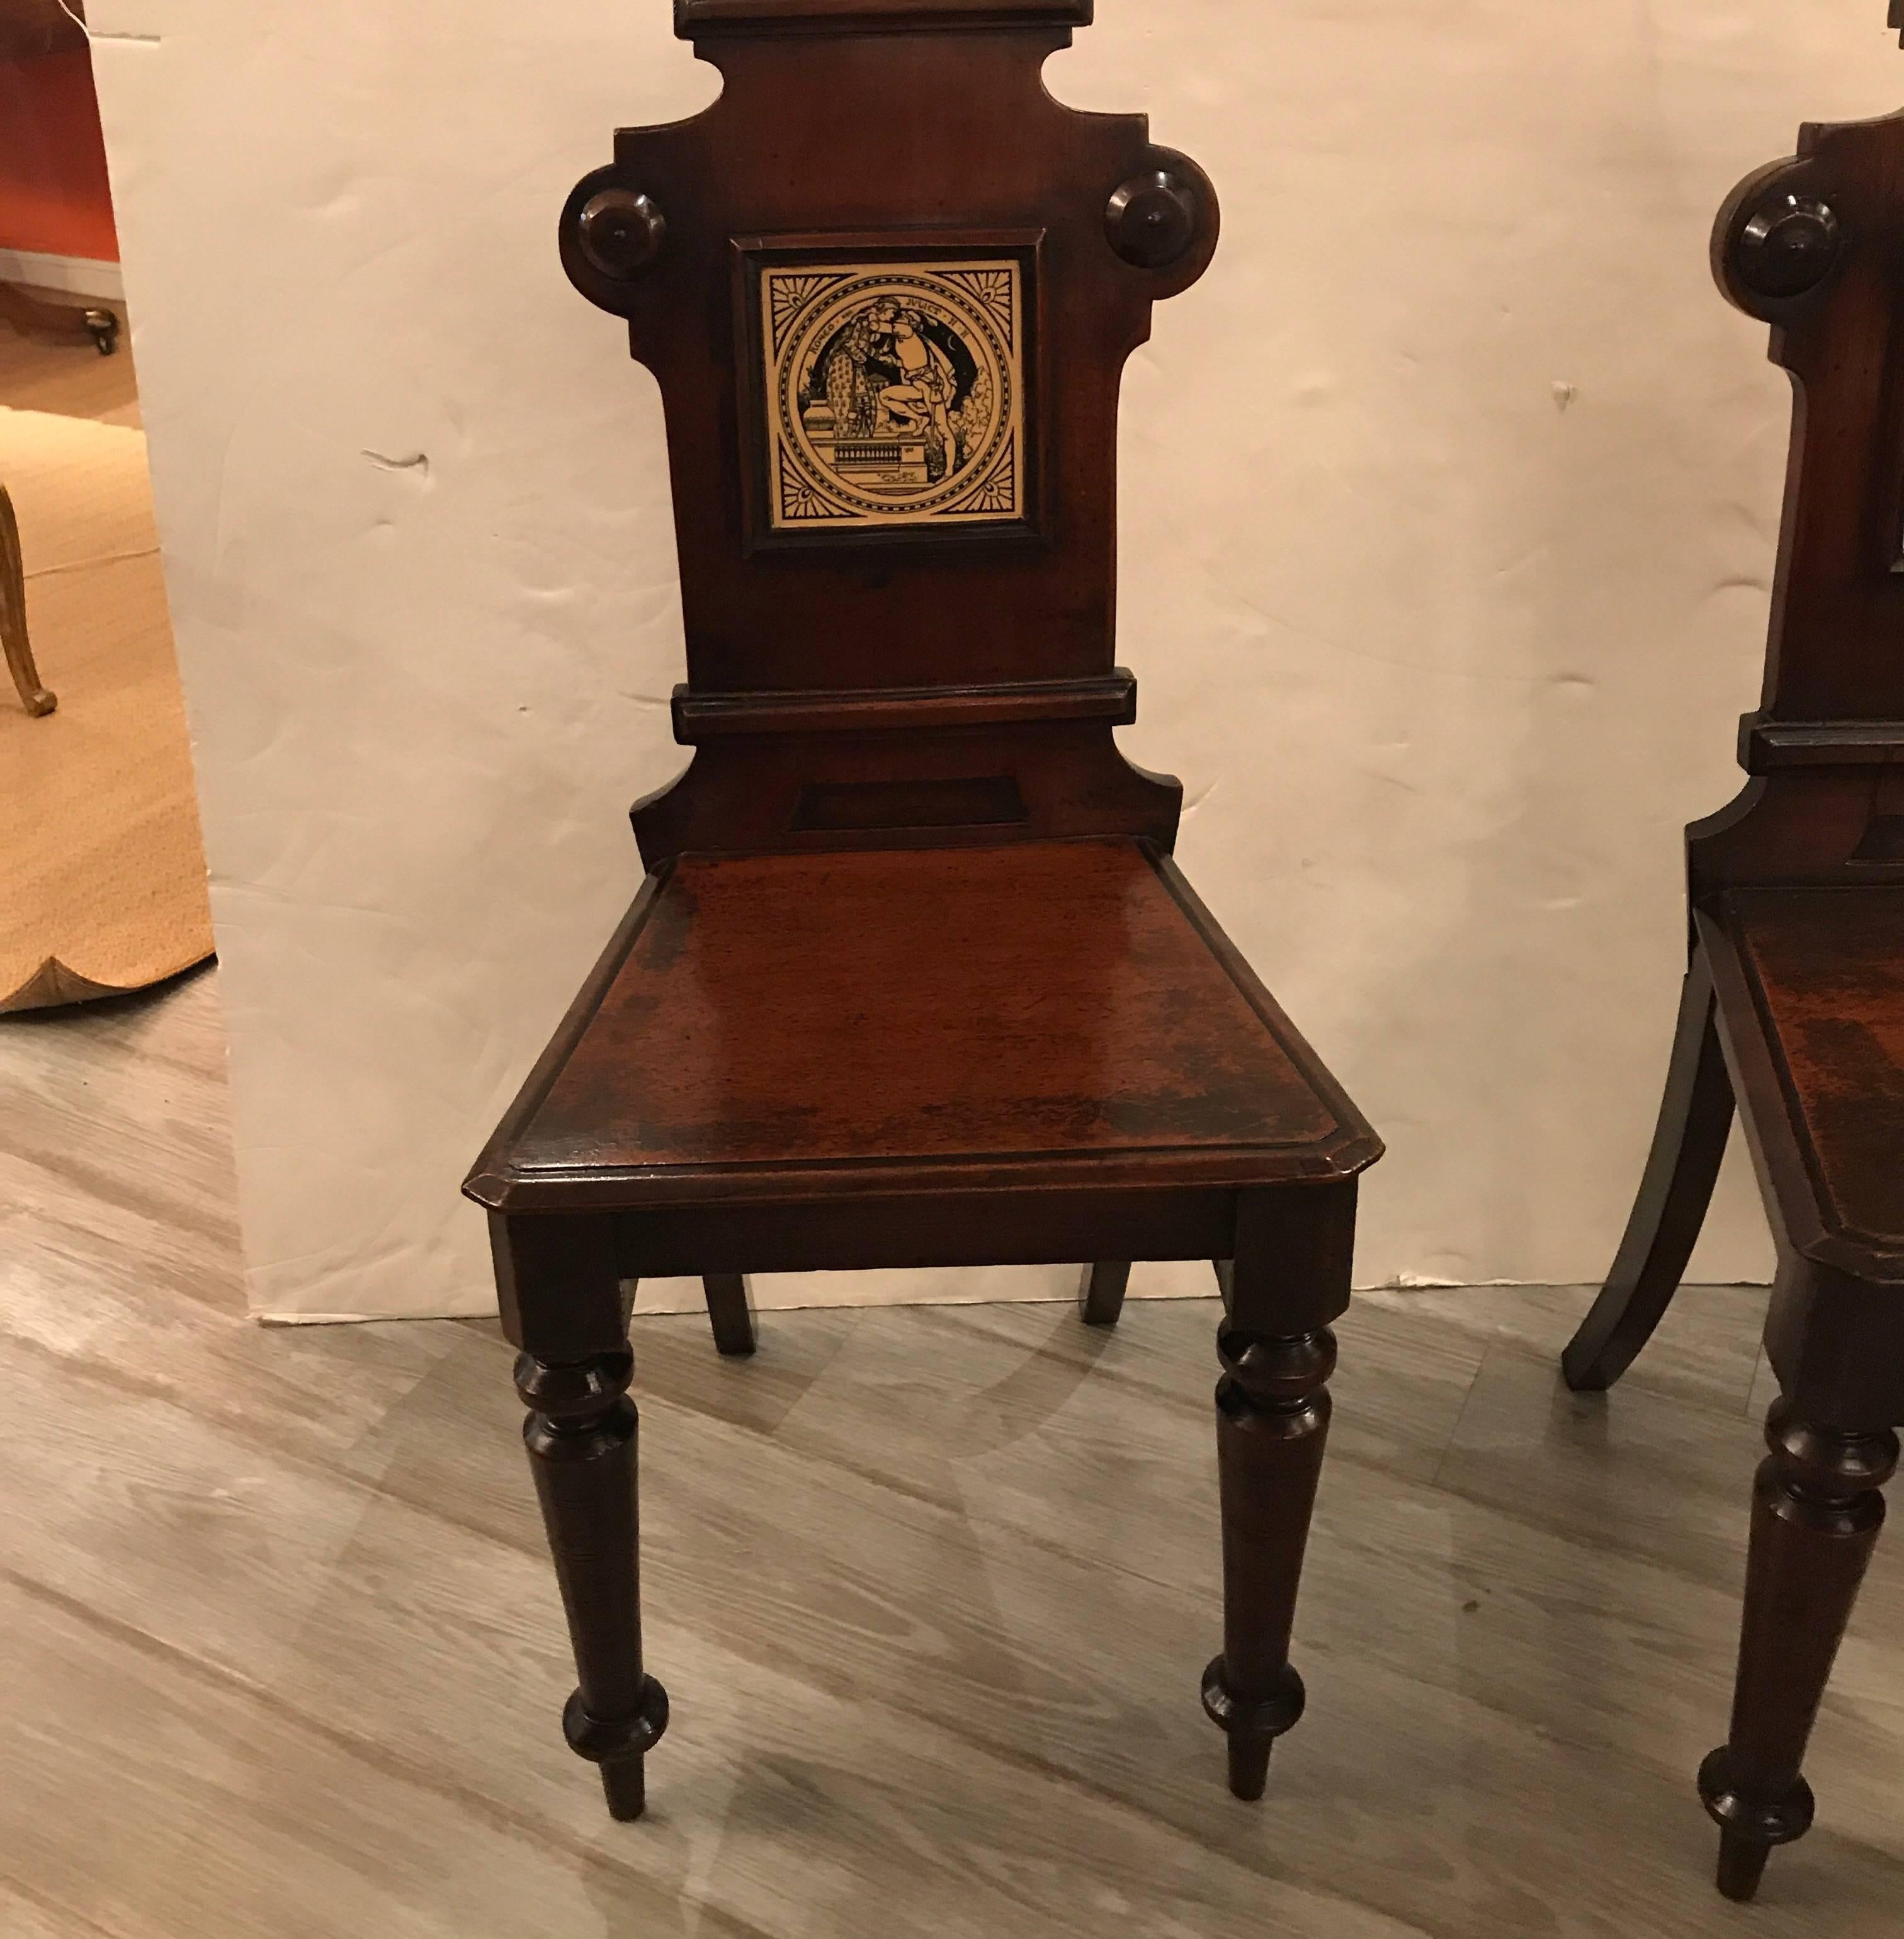 A Stately pair of mahogany hall chairs with Minton tiles set into the backs.  The solid mahogany with original well cared for finish. The tiles are scenes from Shakespeares Romeo and Juliet.  